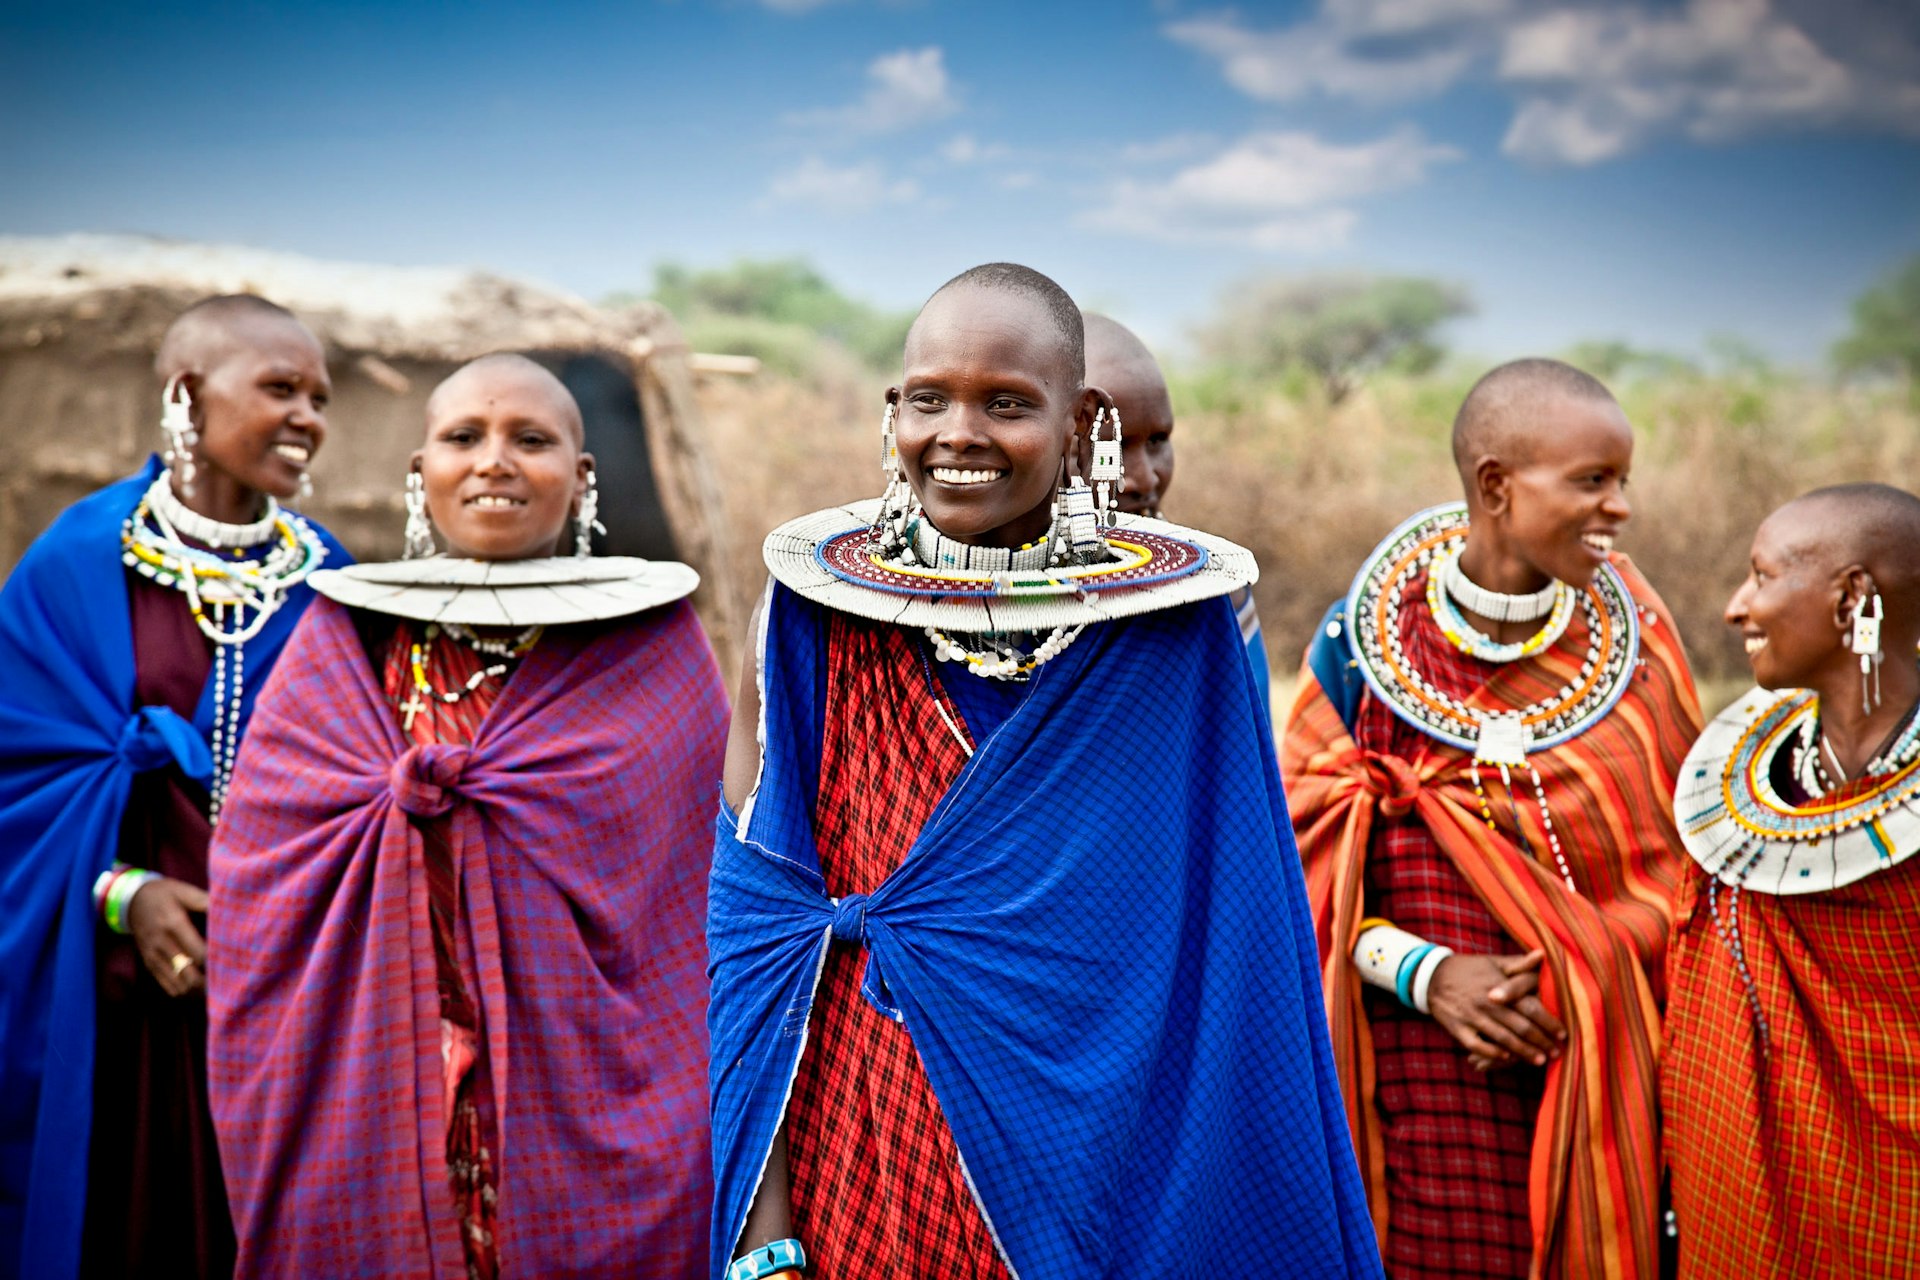 A group of Masai women in traditional  costumes and jewellery, Tanzania